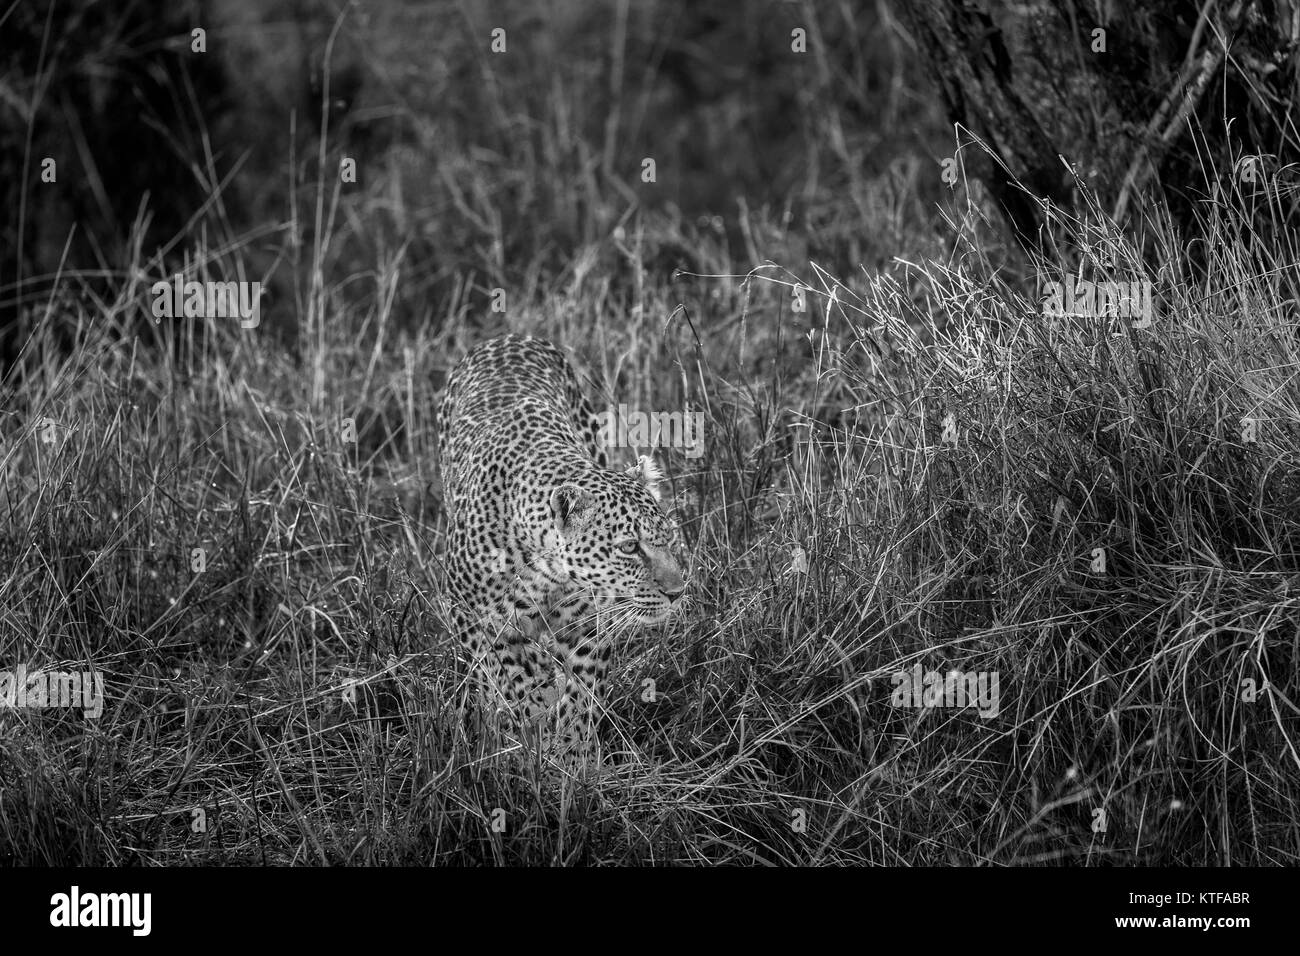 Adult female leopard (Panthera pardus) prowling in long grass, camouflaged by her spotted fur hide, Masai Mara, Kenya Stock Photo